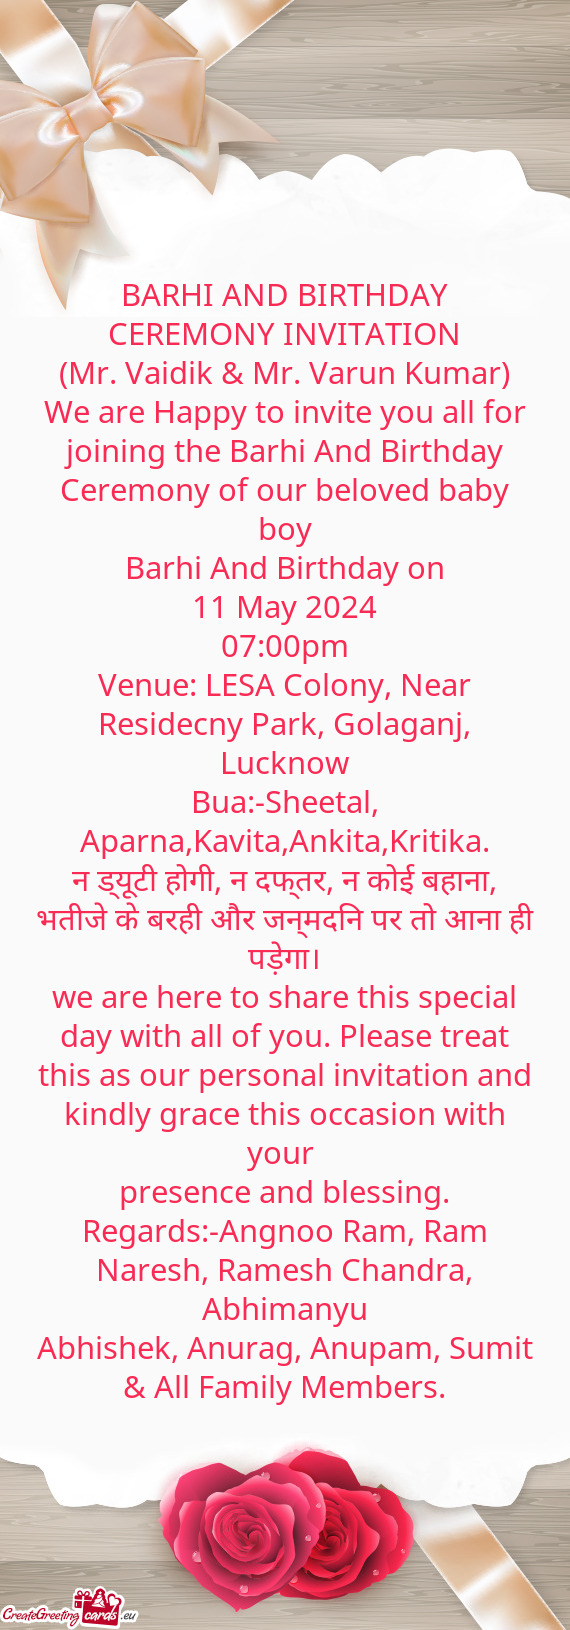 We are Happy to invite you all for joining the Barhi And Birthday Ceremony of our beloved baby boy